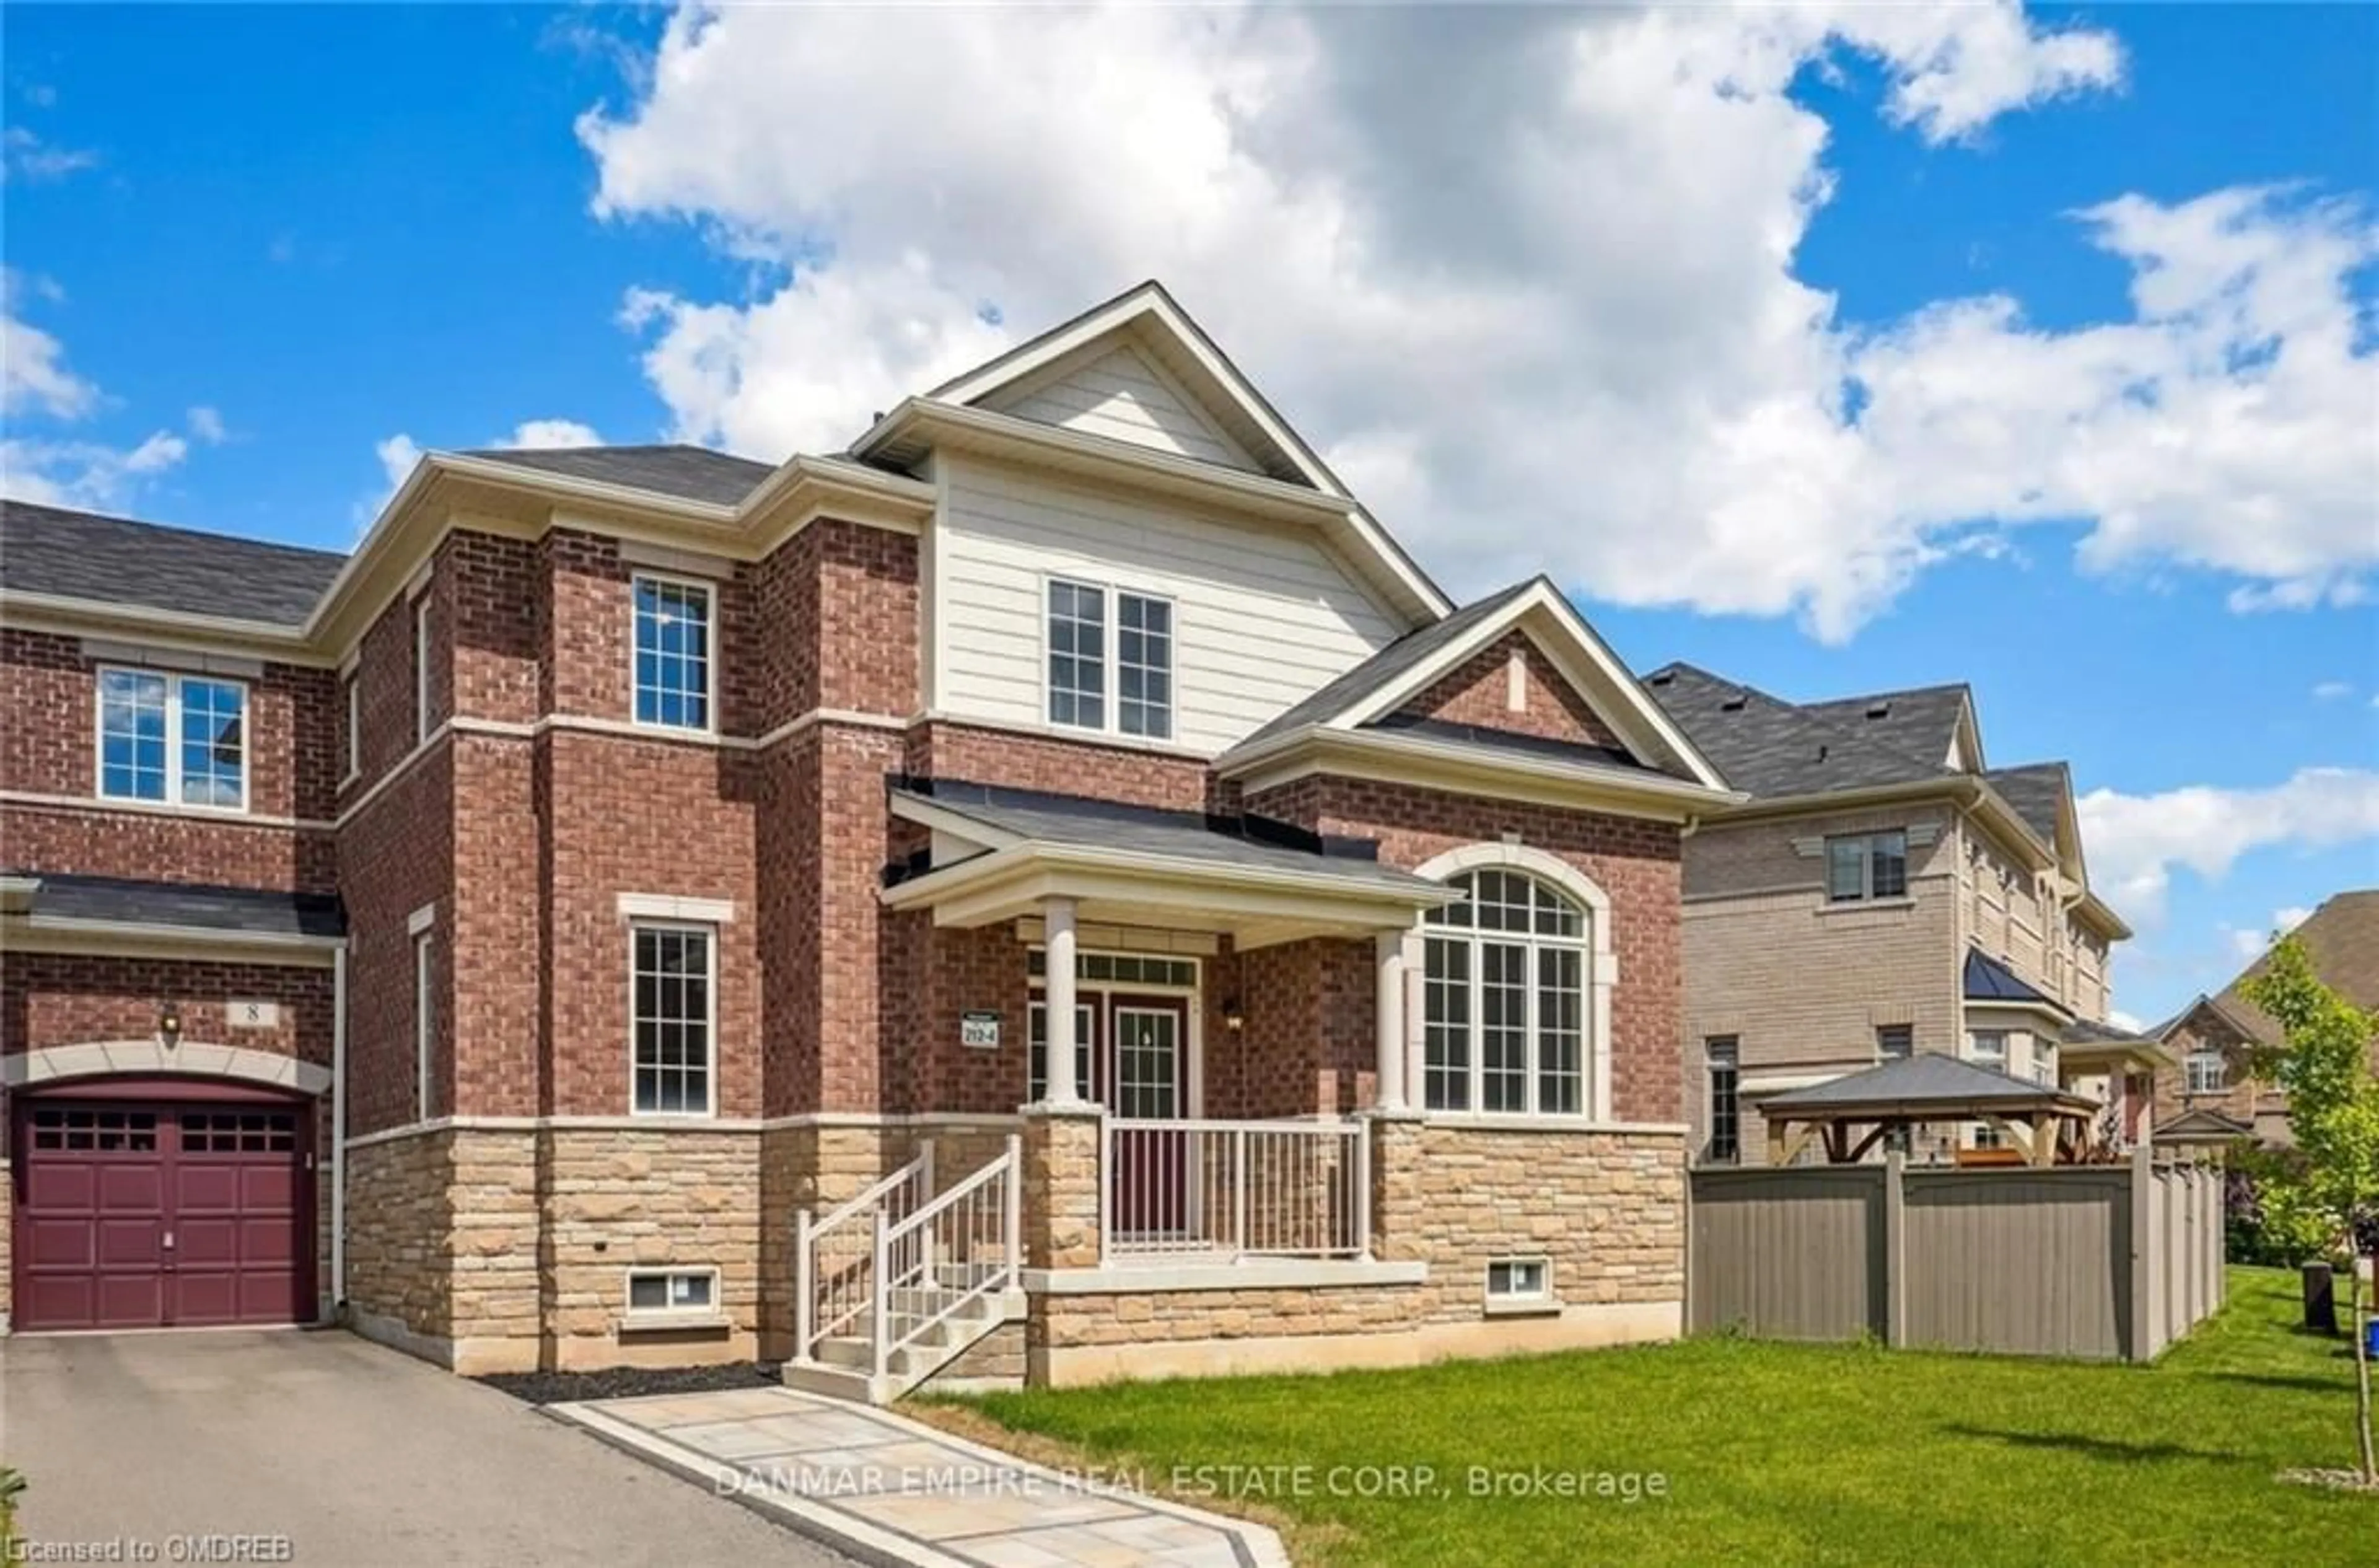 Home with brick exterior material for 8 Slater Mill Place, Waterdown Ontario L0R 2H1